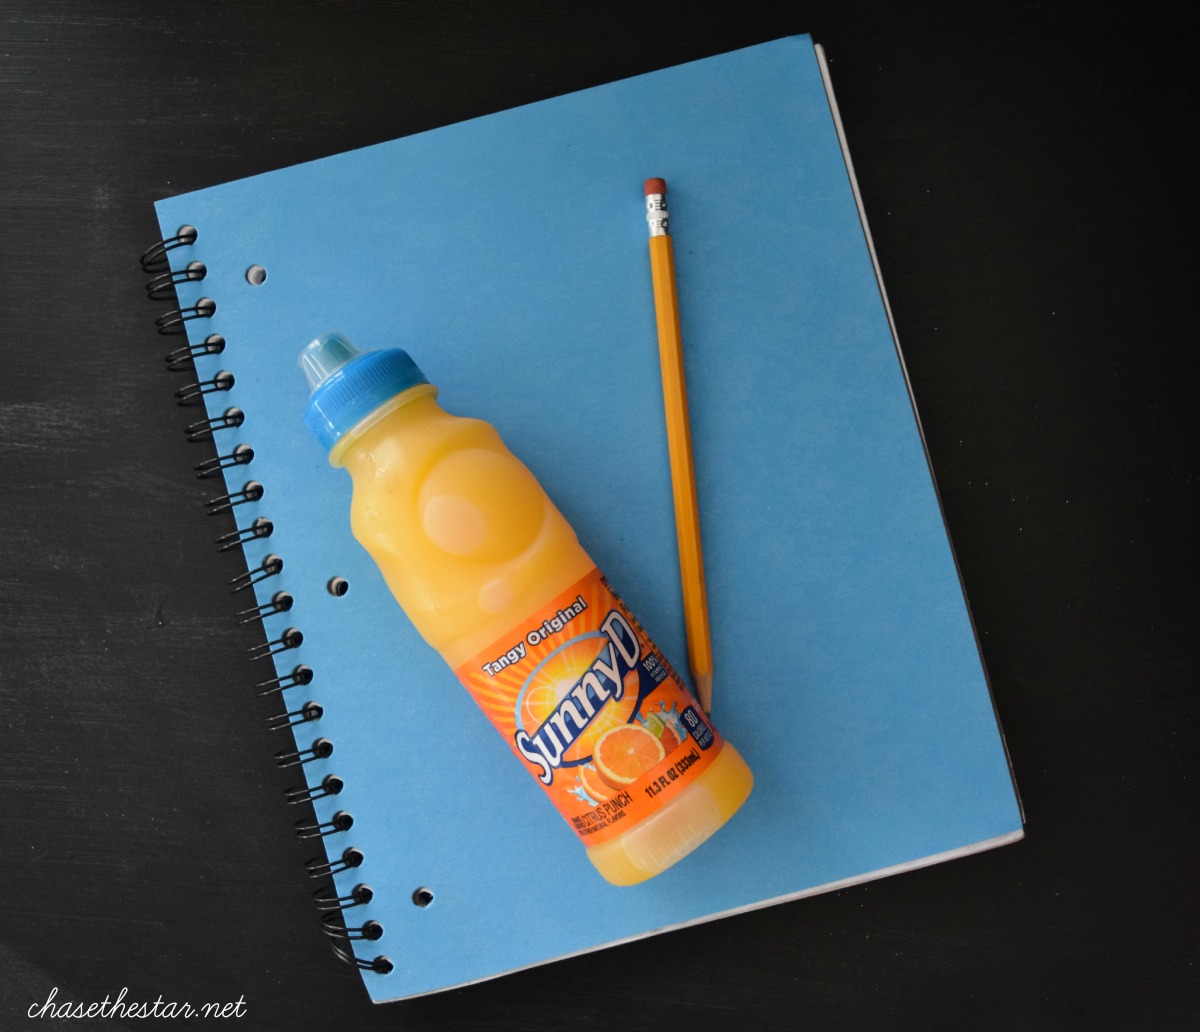 Afterschool is a great time for SunnyD! #KeepItSunny #PMedia #ad